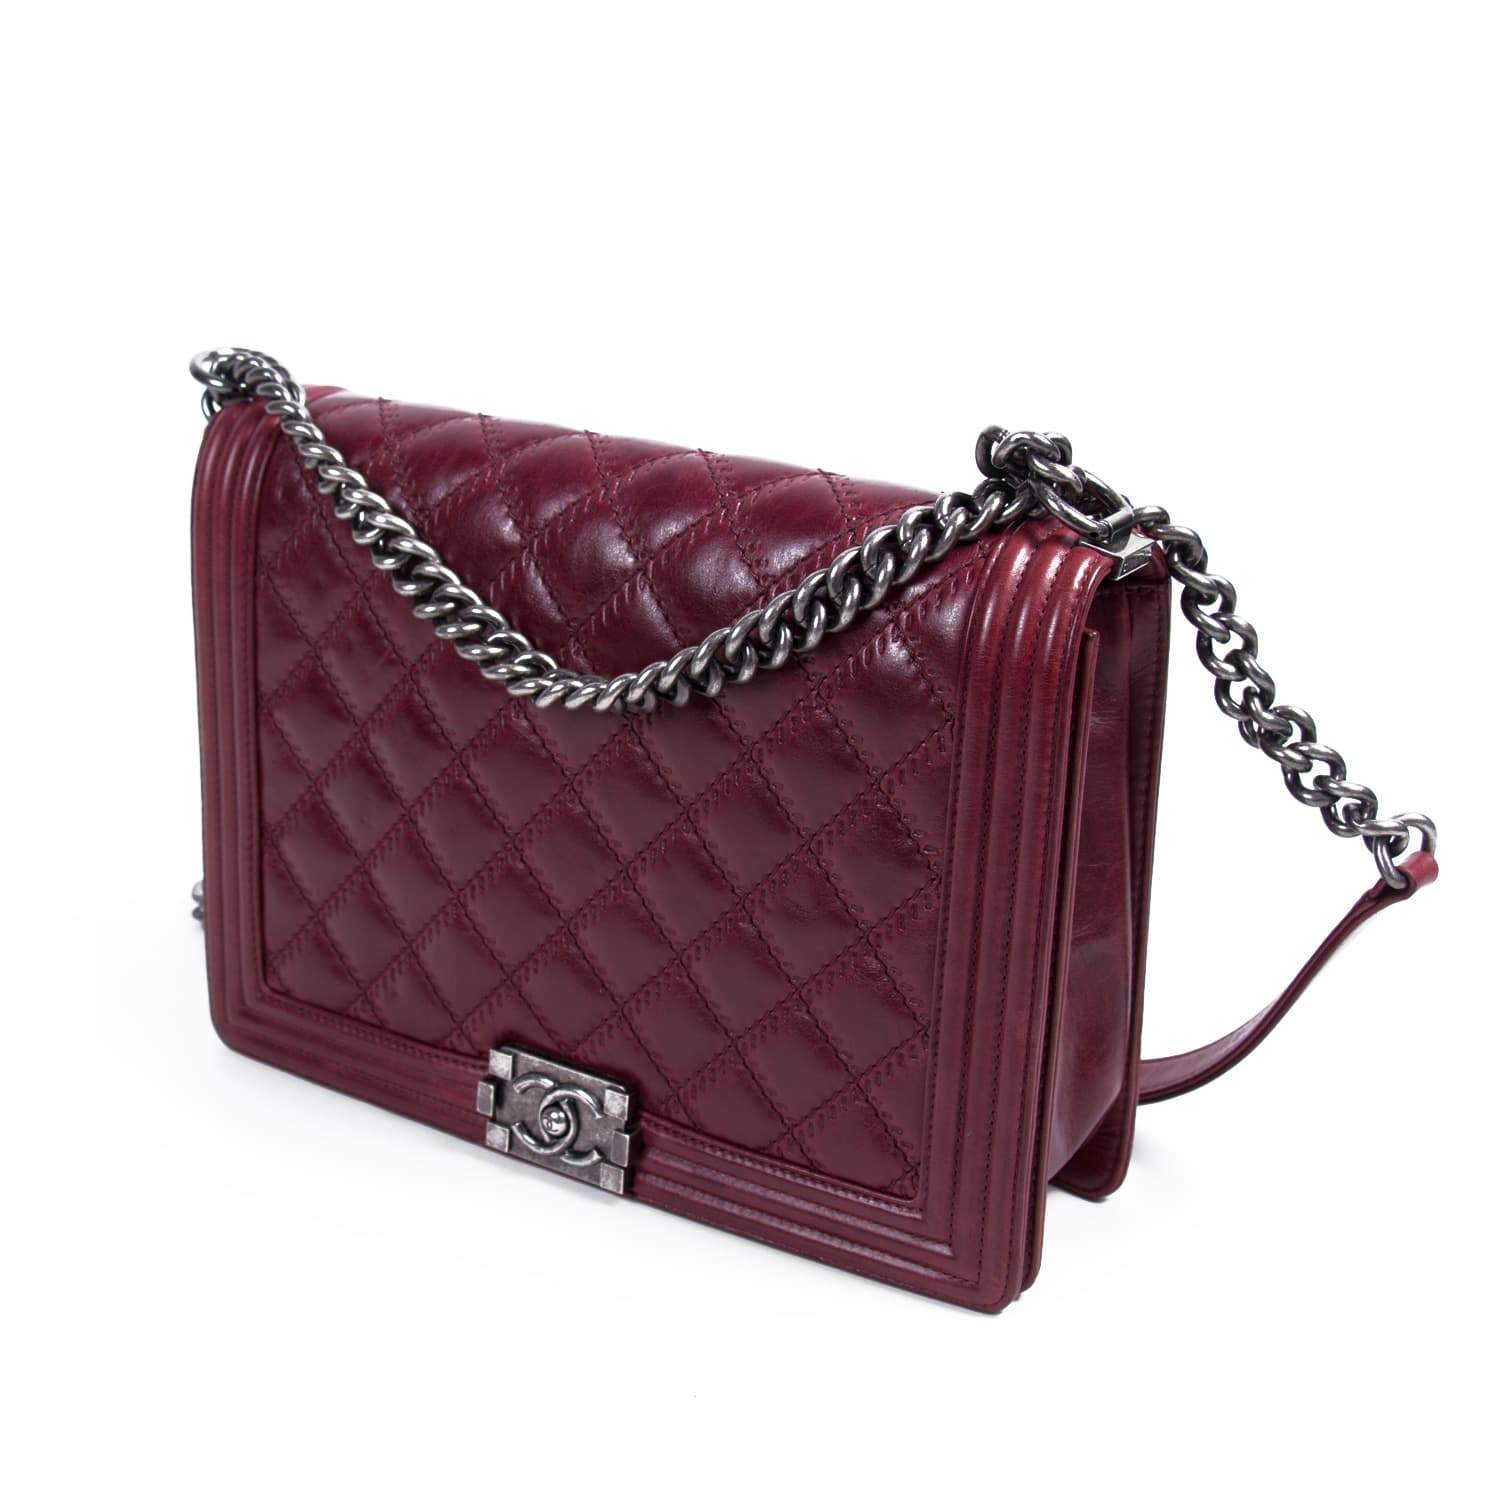 Chanel Large Burgundy Quilted Leather Large Boy Bag